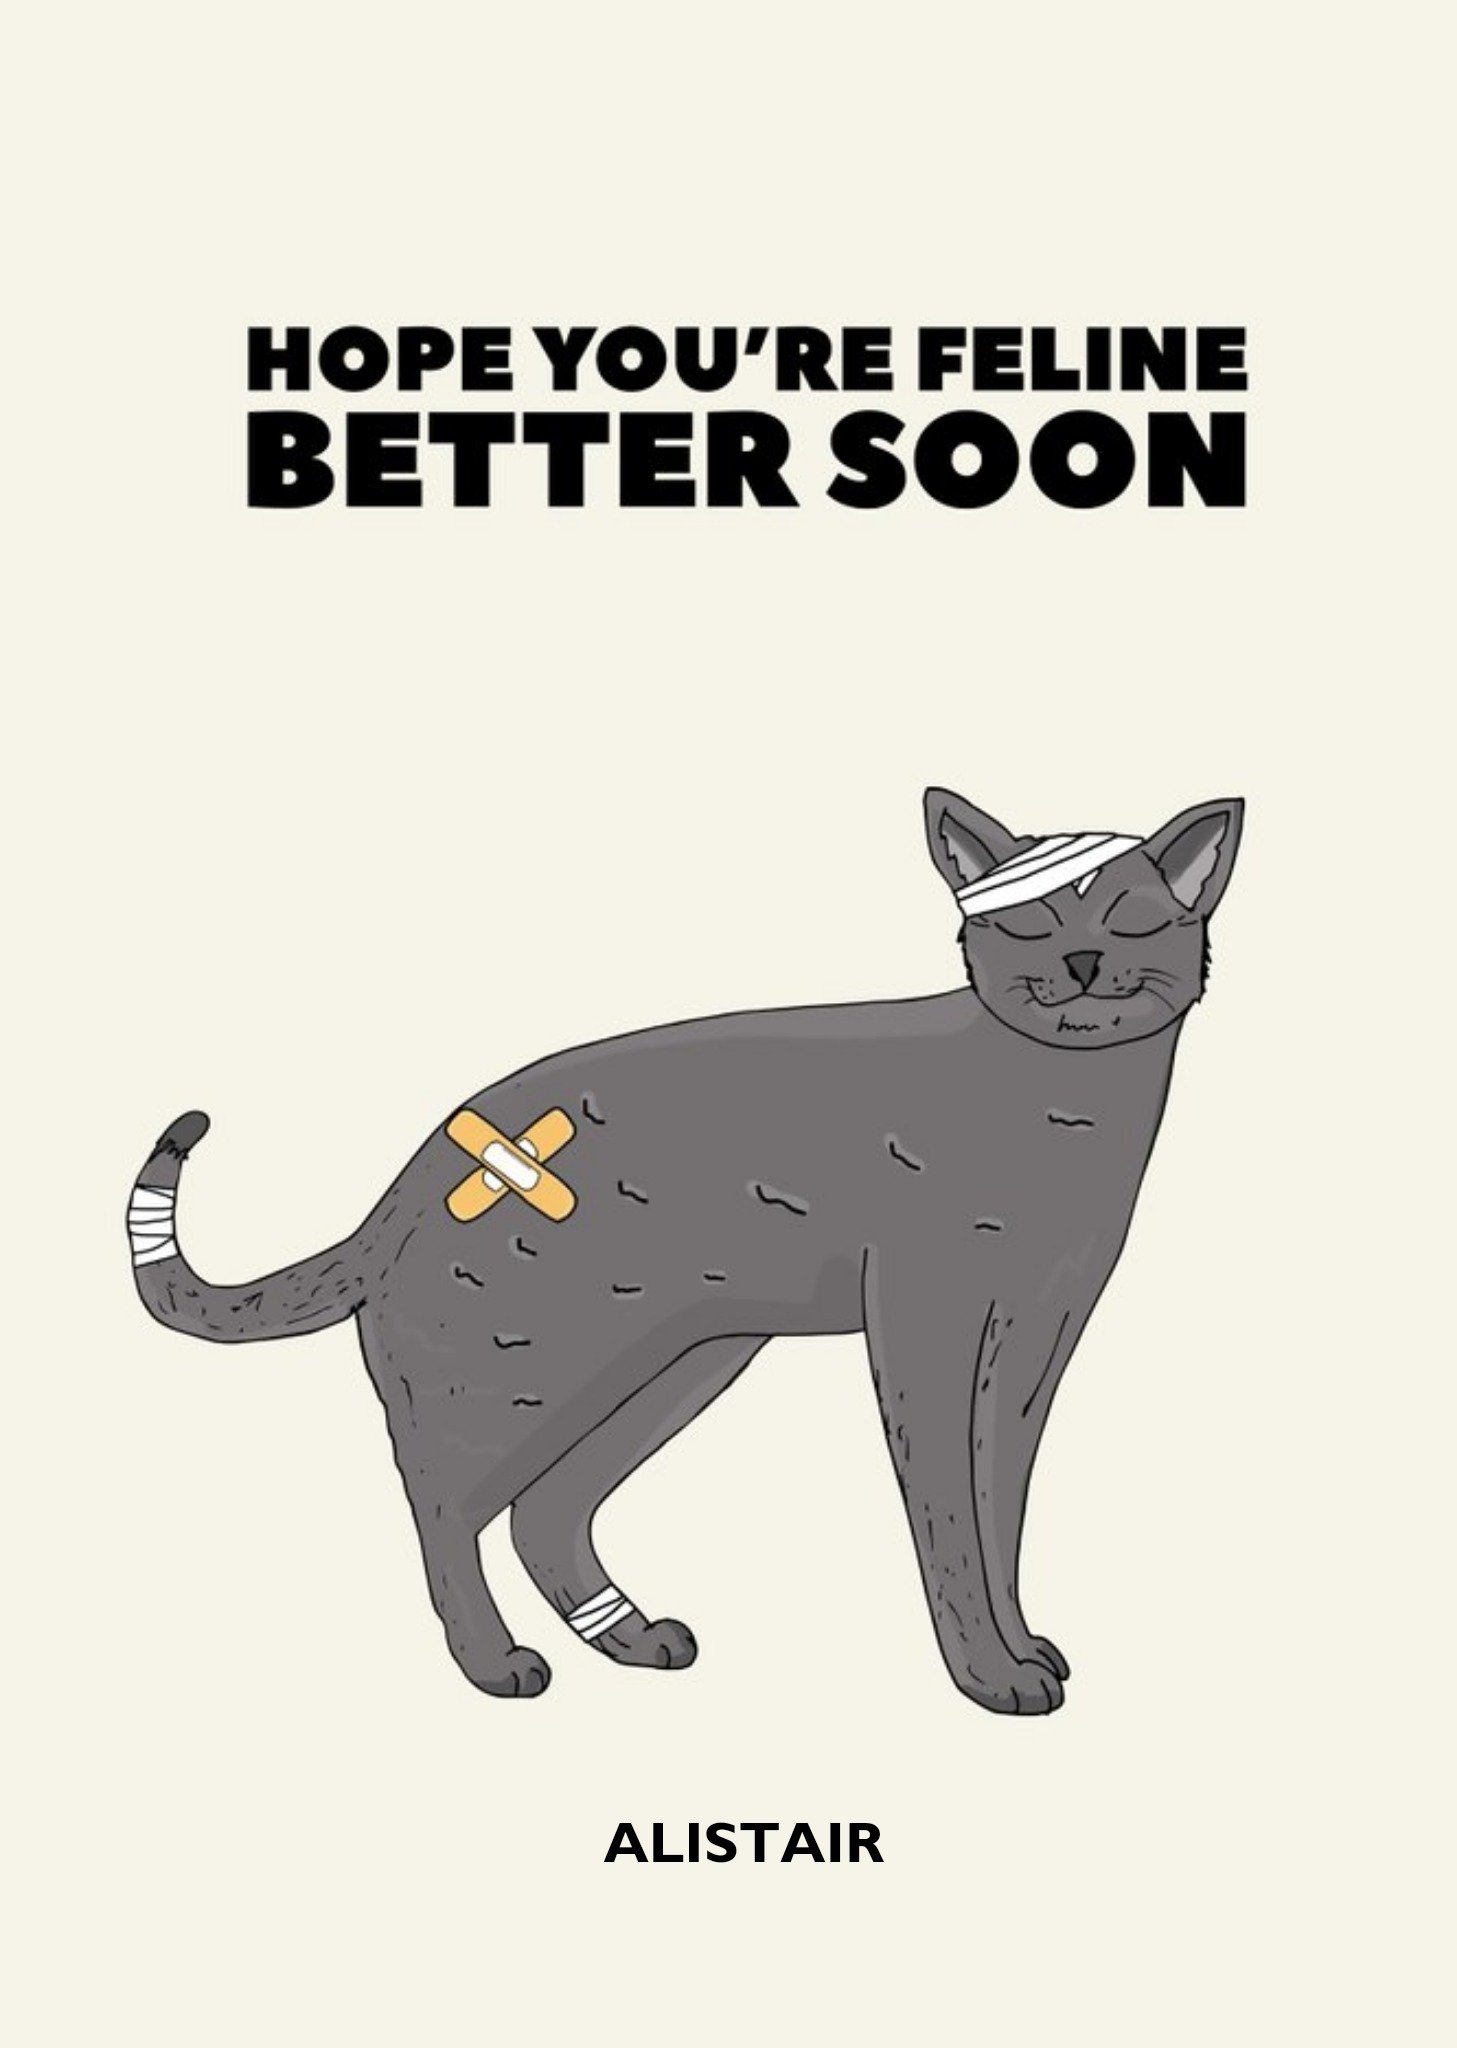 Moonpig Illustration Of A Cat With Bandages Get Well Soon Card, Large